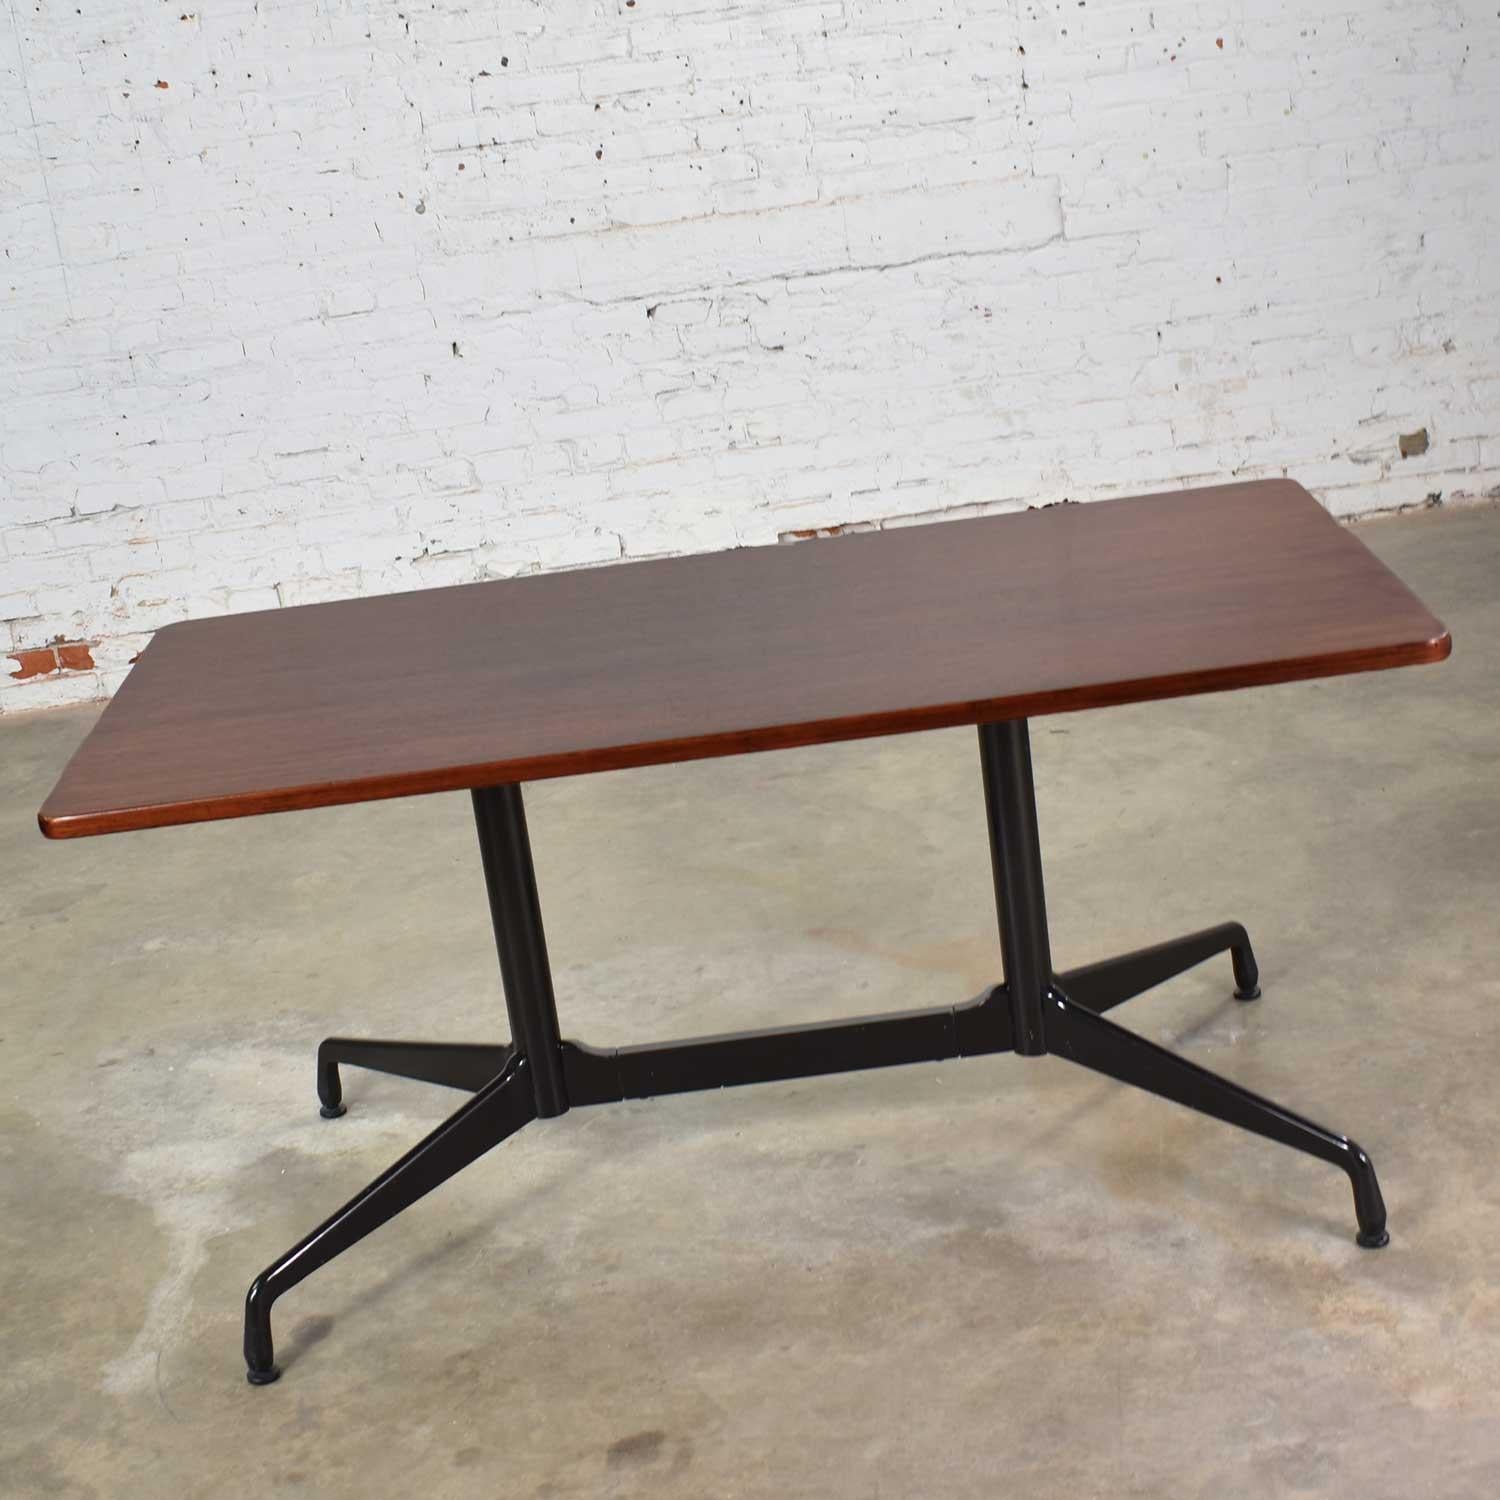 Handsome rectangular conference or dining table from the Aluminum Group designed by Charles and Ray Eames for Herman Miller. This one has a rosewood colored veneer top with black band and a black segmented double pedestal base. It is in wonderful